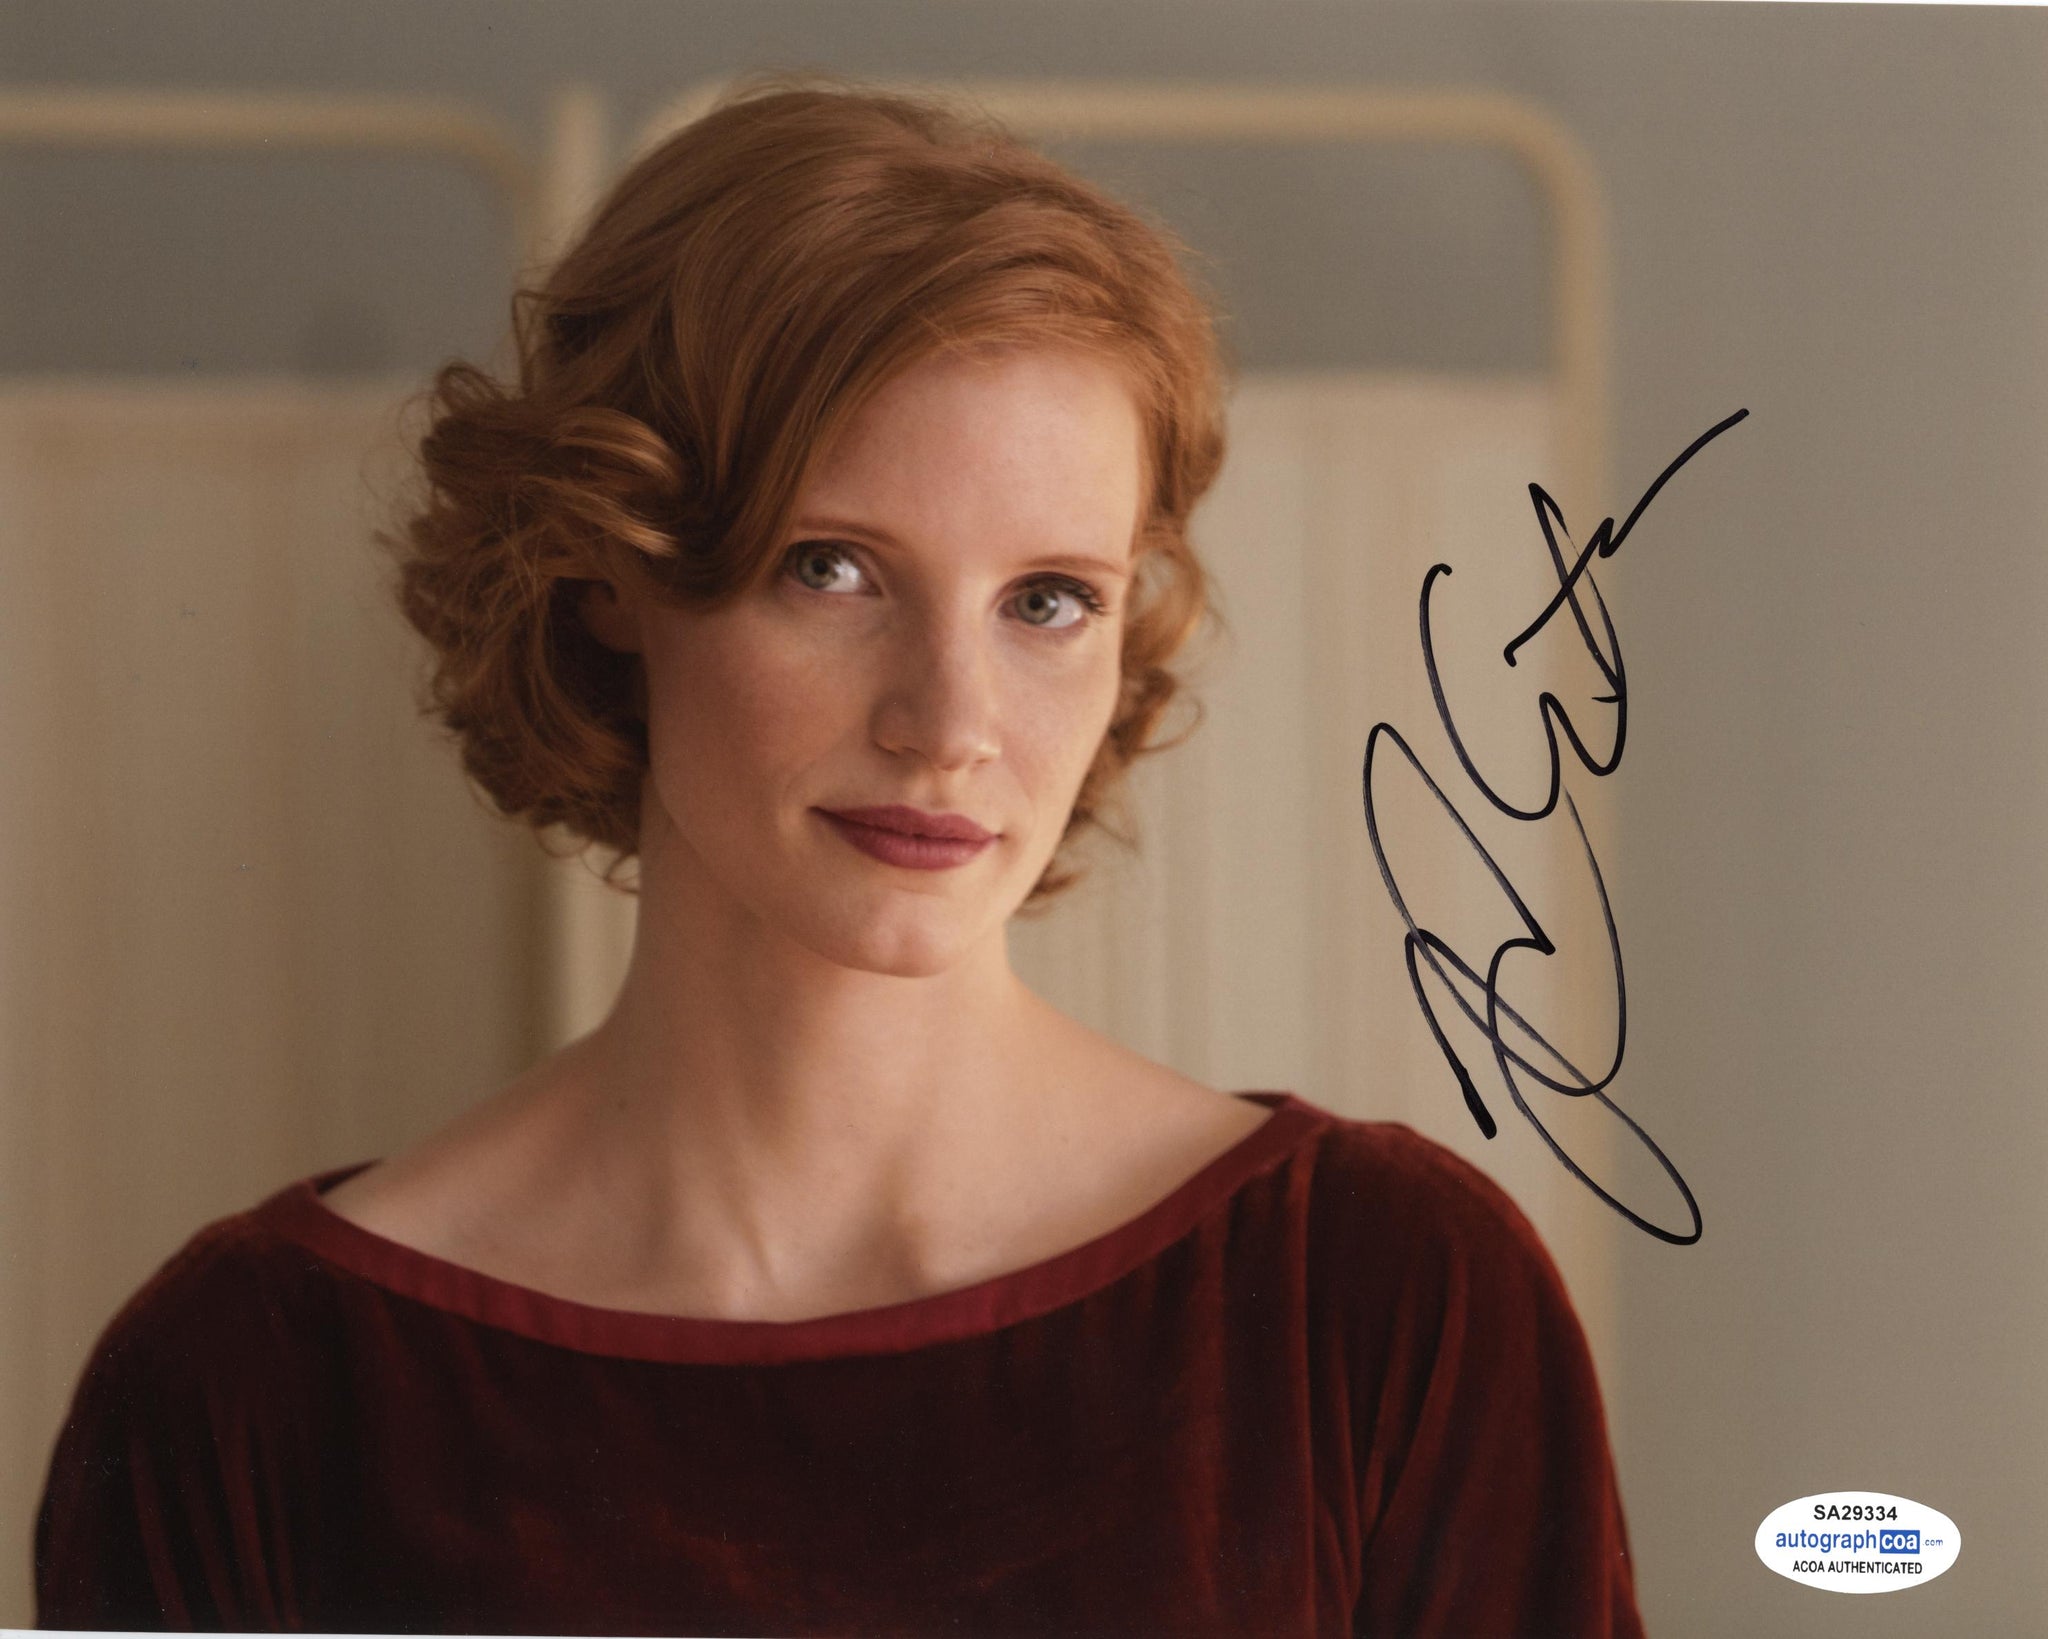 Jessica Chastain Lawless Signed Autograph 8x10 Photo ACOA #5 - Outlaw Hobbies Authentic Autographs